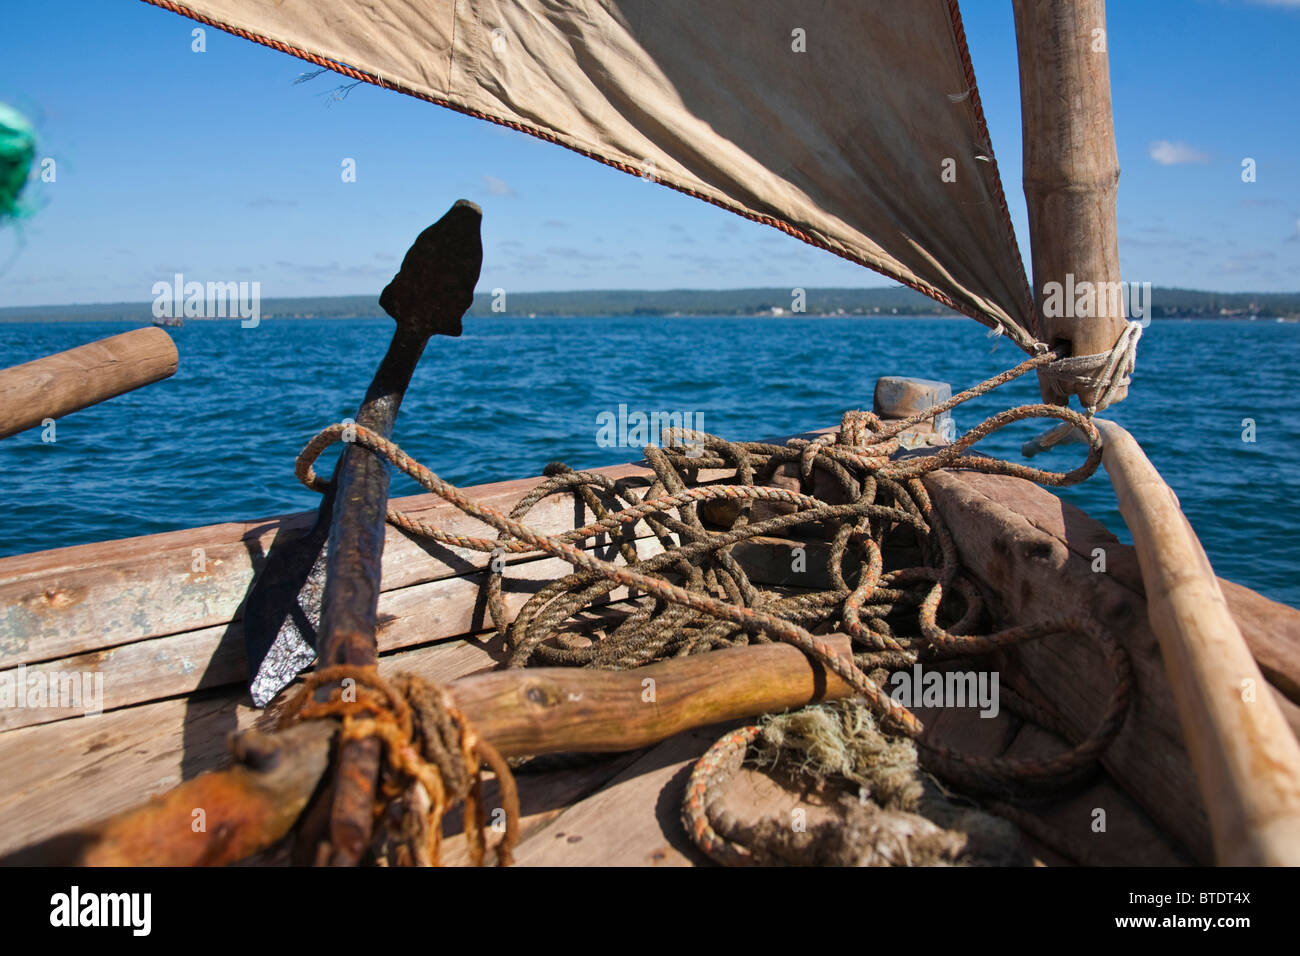 Close-up view of rope and anchor lying in the front of a dhow or traditional fishing boat Stock Photo